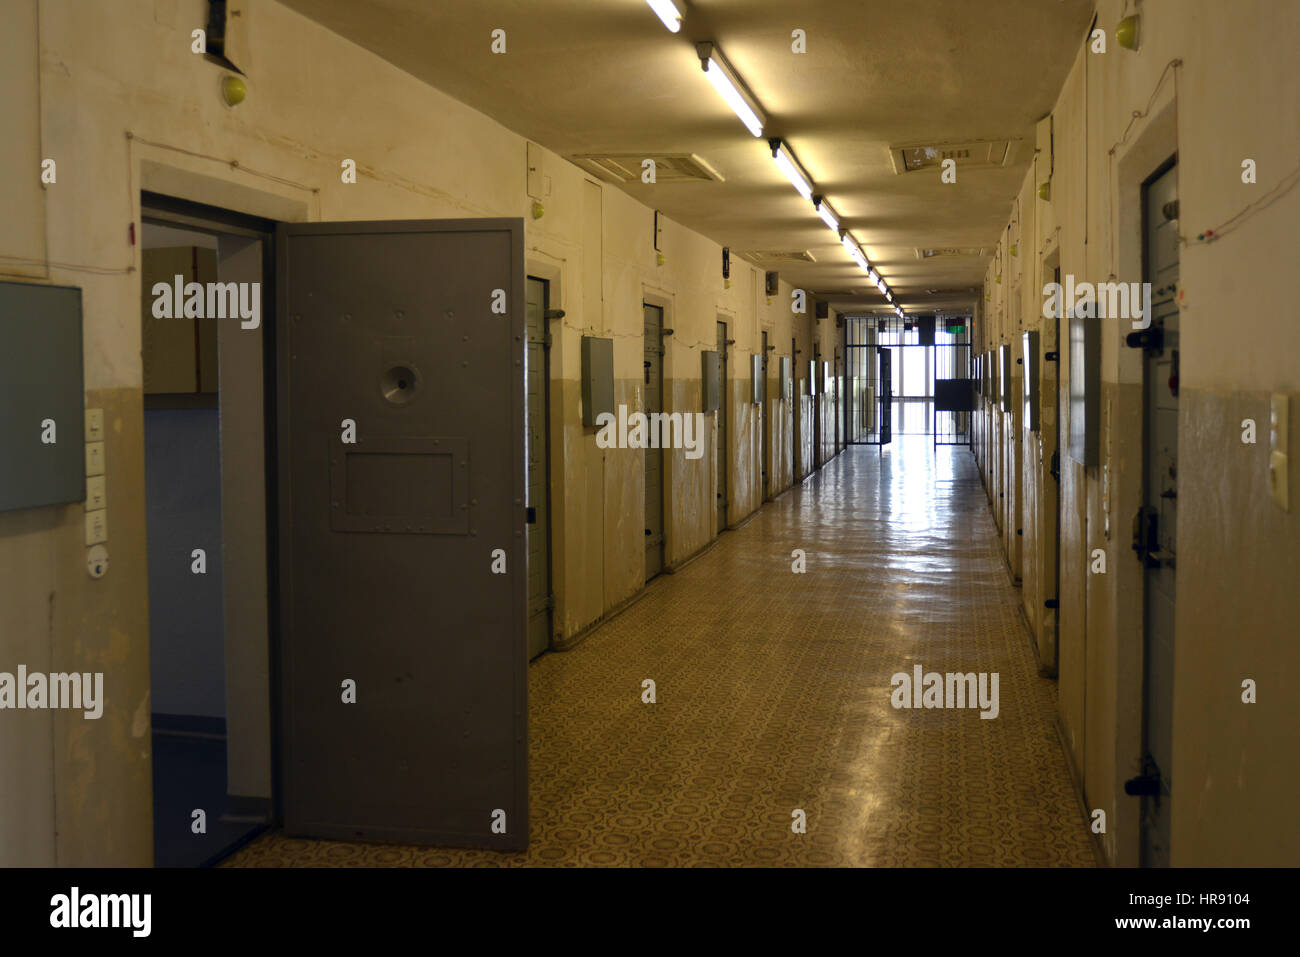 Gedenkstätte Berlin-Hohenschönhausen, Germany, April 23 2016. Cell doors in a corridor, over 20,000 people were detained from 1945 to 1990 in the pris Stock Photo